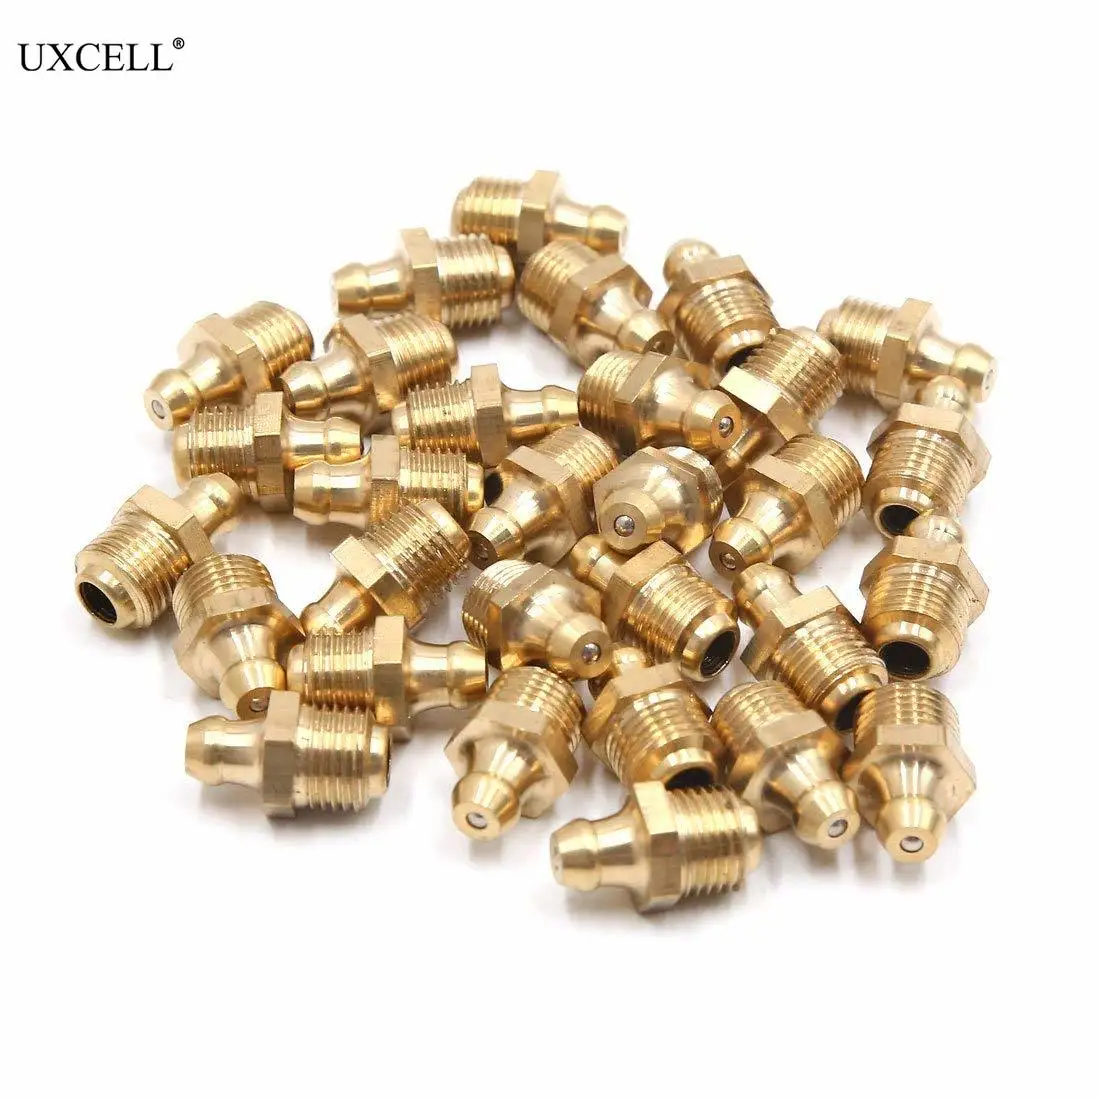 uxcell 4 Pcs Brass M10 x 1mm Thread 45 Degree Angle Grease Zerk Nipple Fitting for Car 